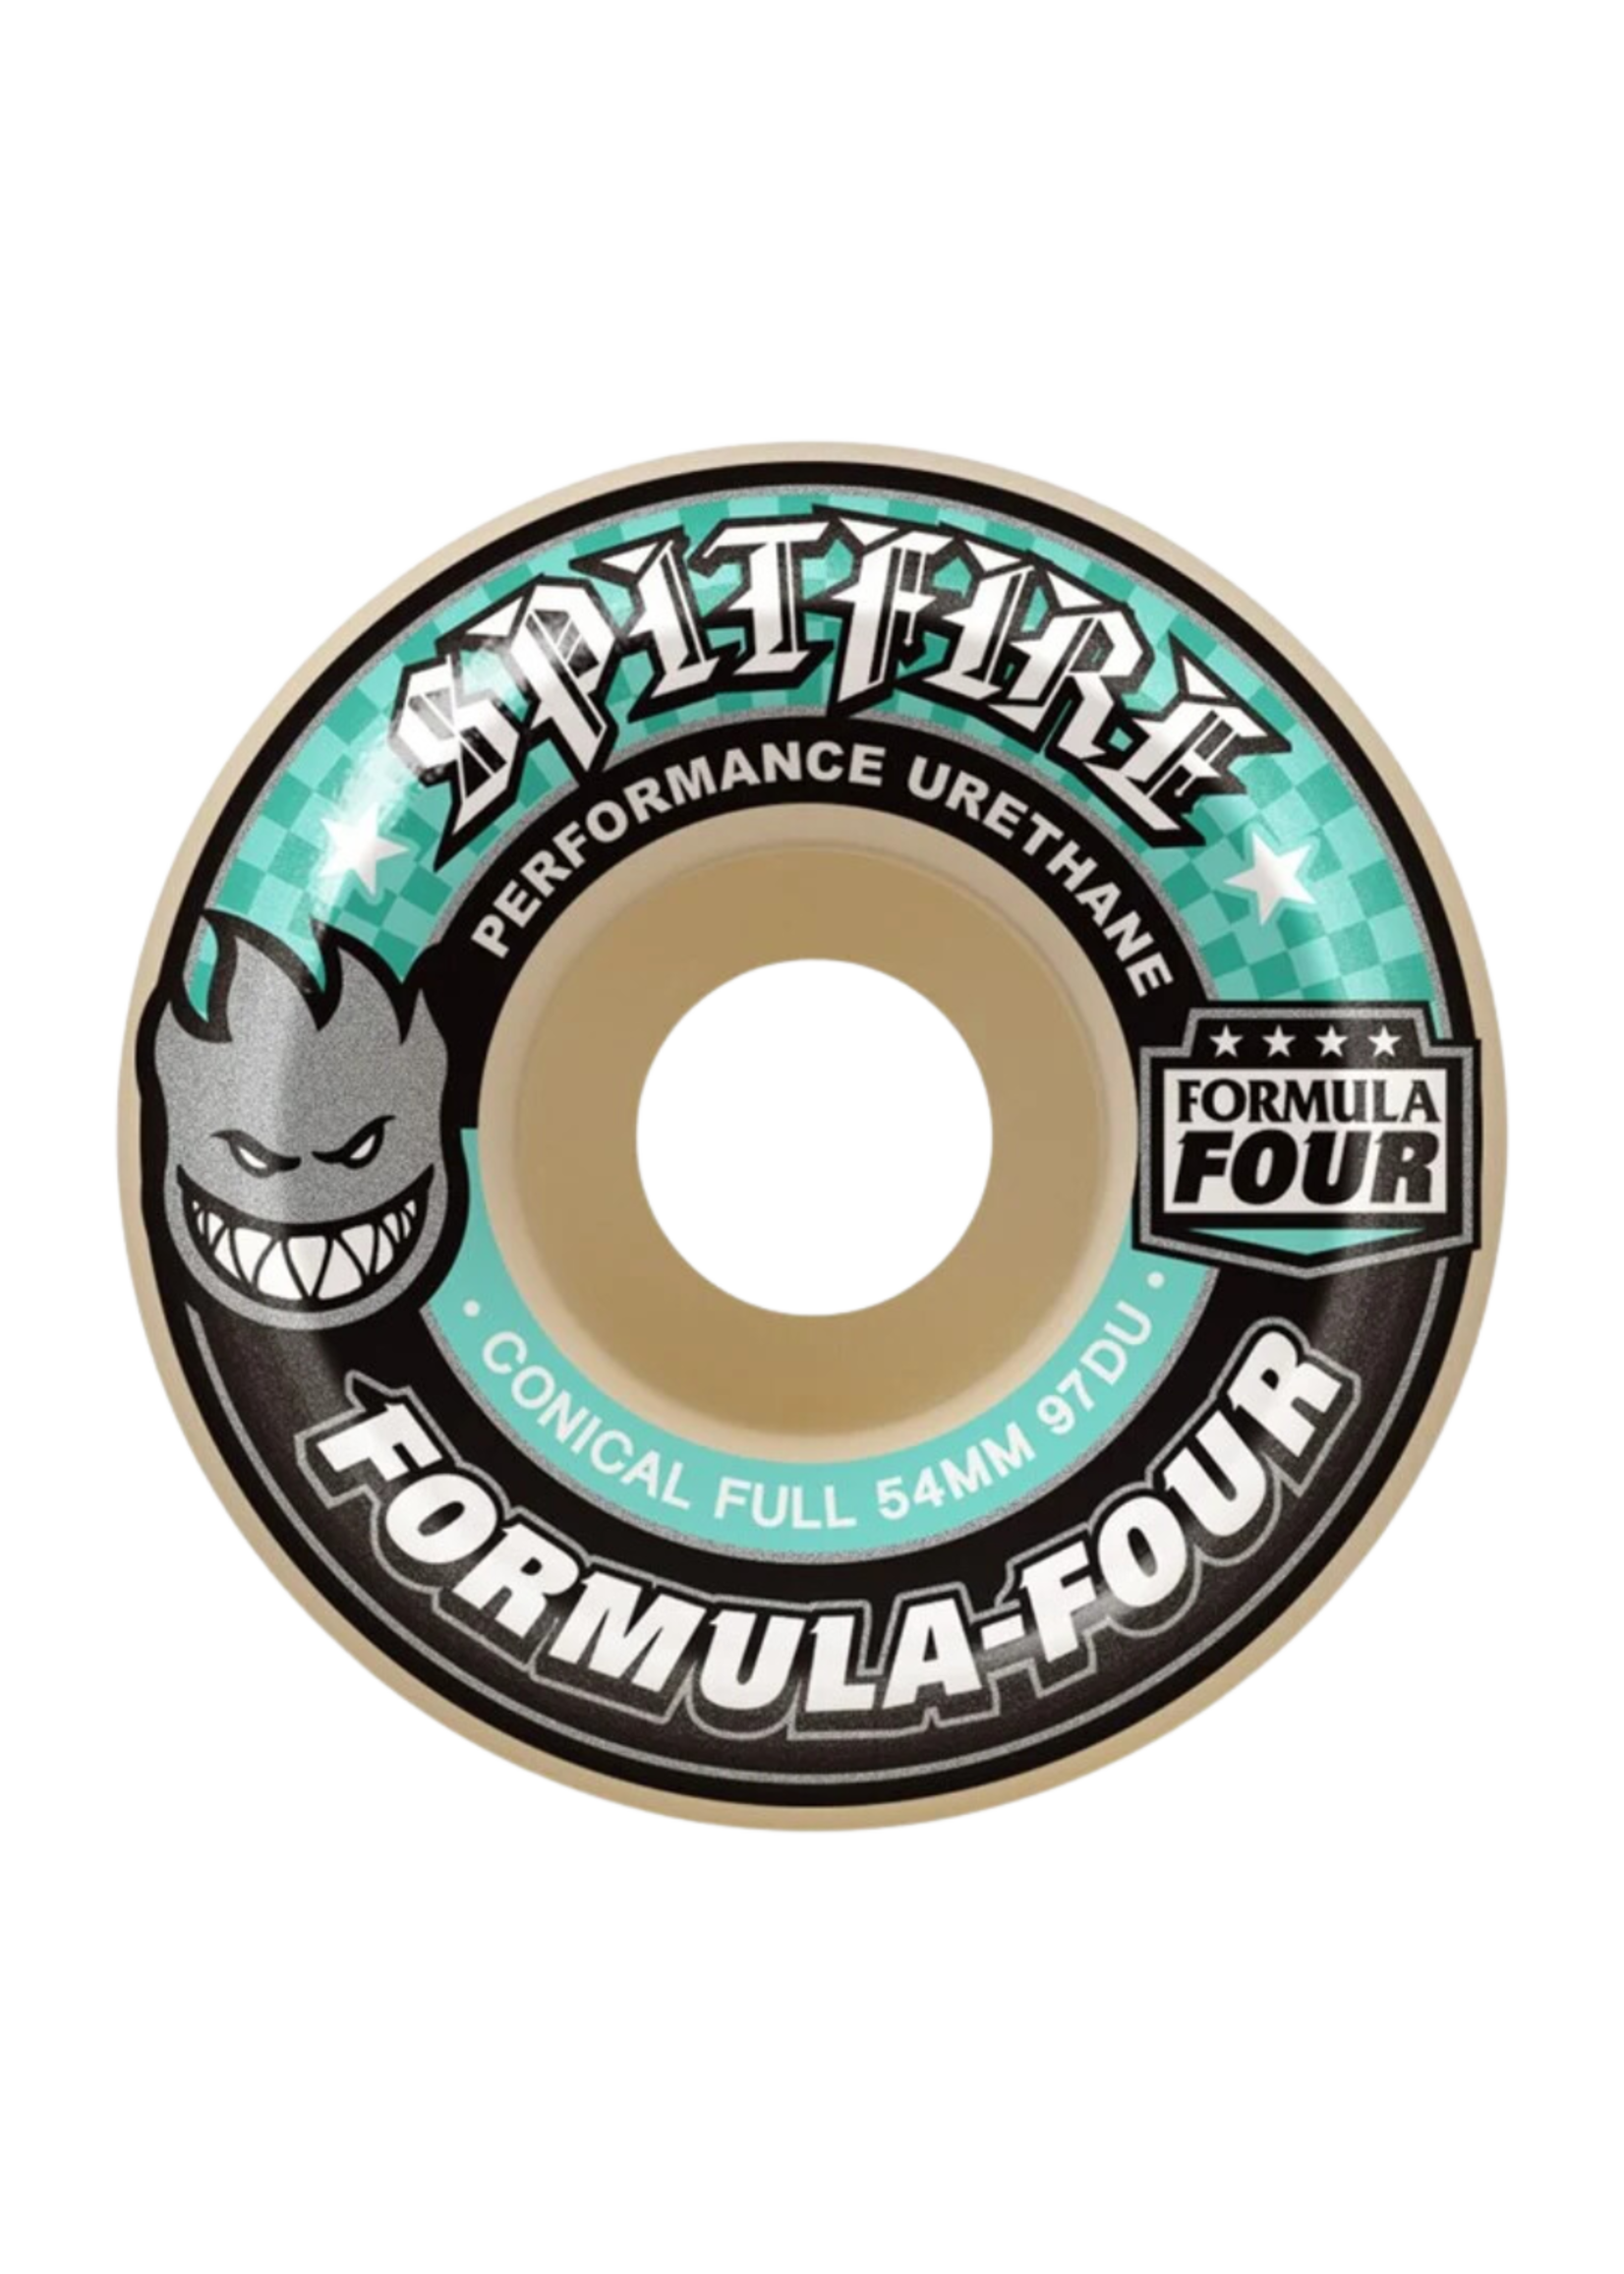 SPITFIRE CONICAL FULL F4 54, 56, 58MM / 97A